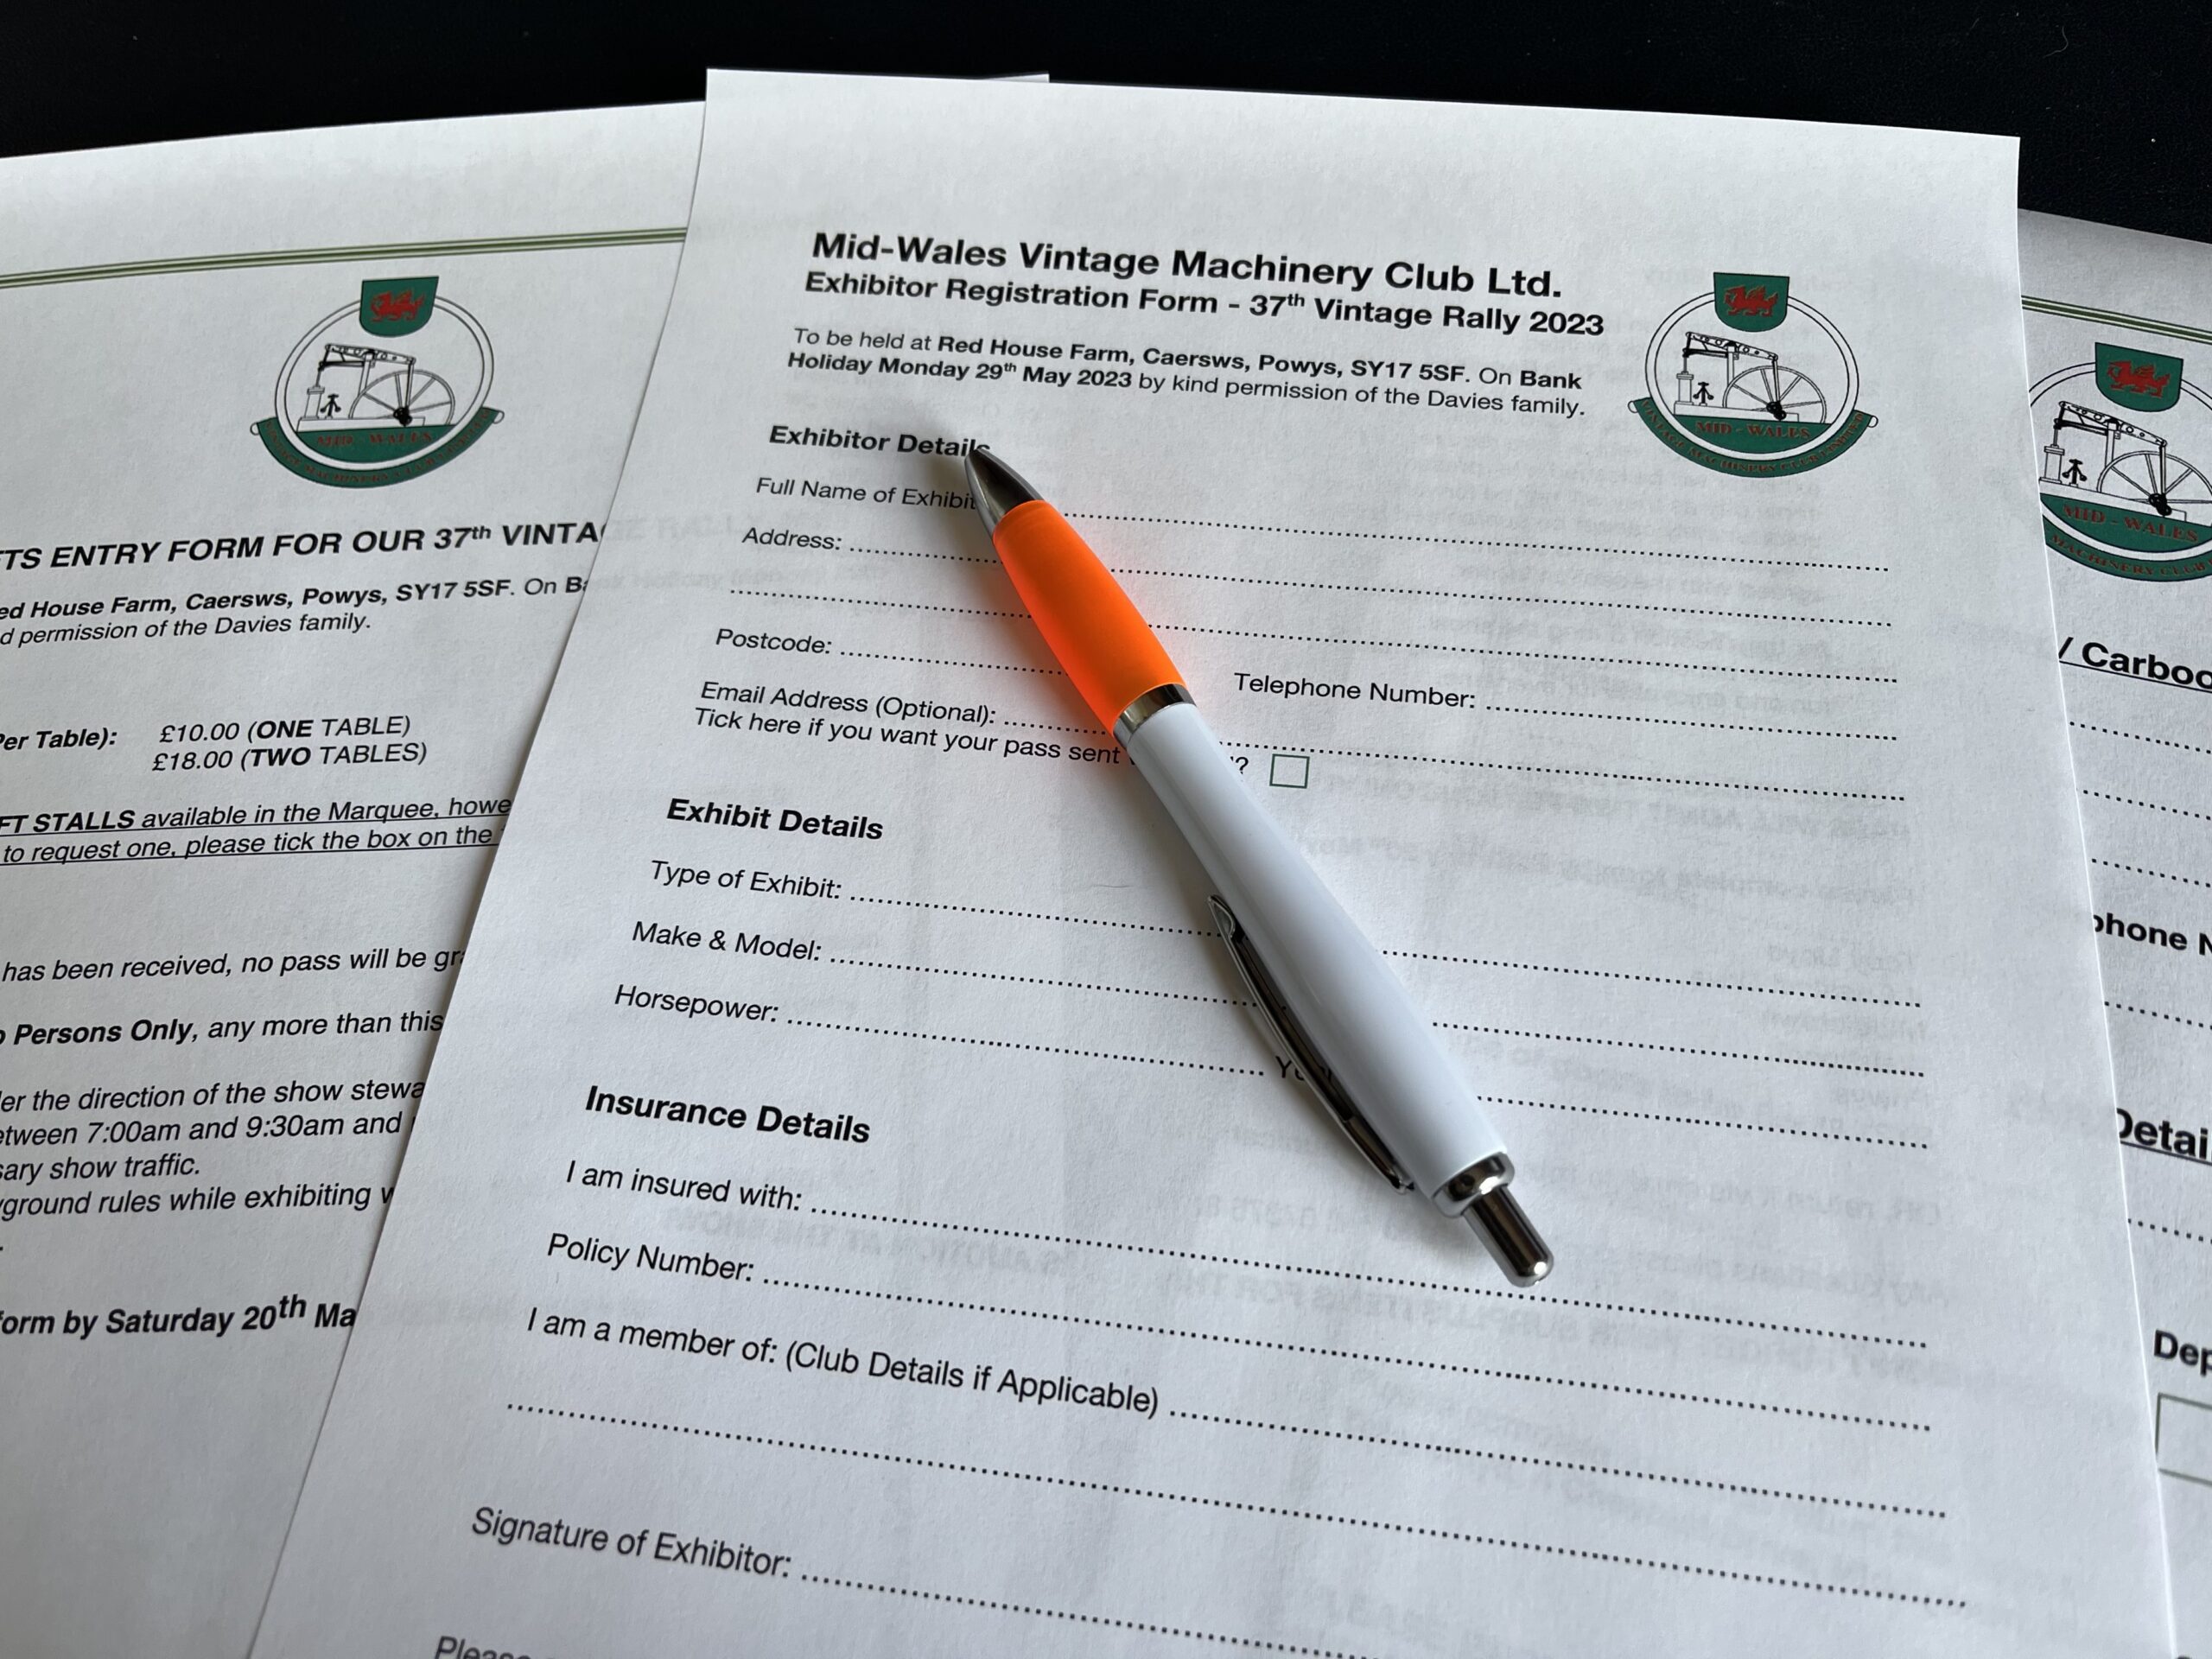 Registration forms for the Caersws Vintage Rally layed out on a table with a orange pen resting on the top of them.